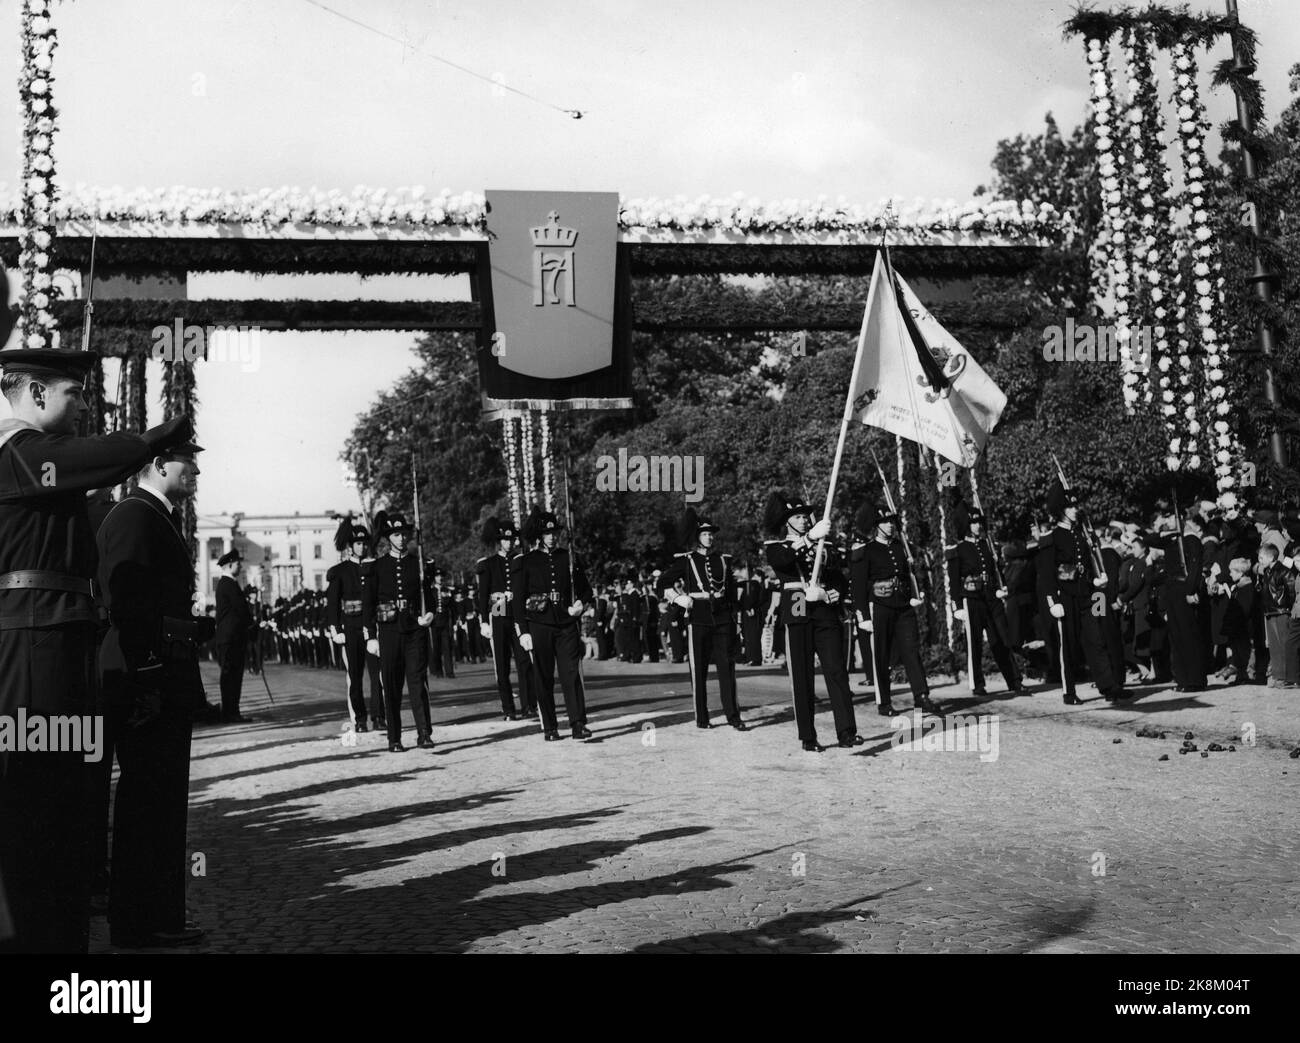 Oslo 19571001. King Haakon on 7th buried. Garden's soldiers parades / defiles with tabs. The castle is seen in the background. Photo: NTB Stock Photo